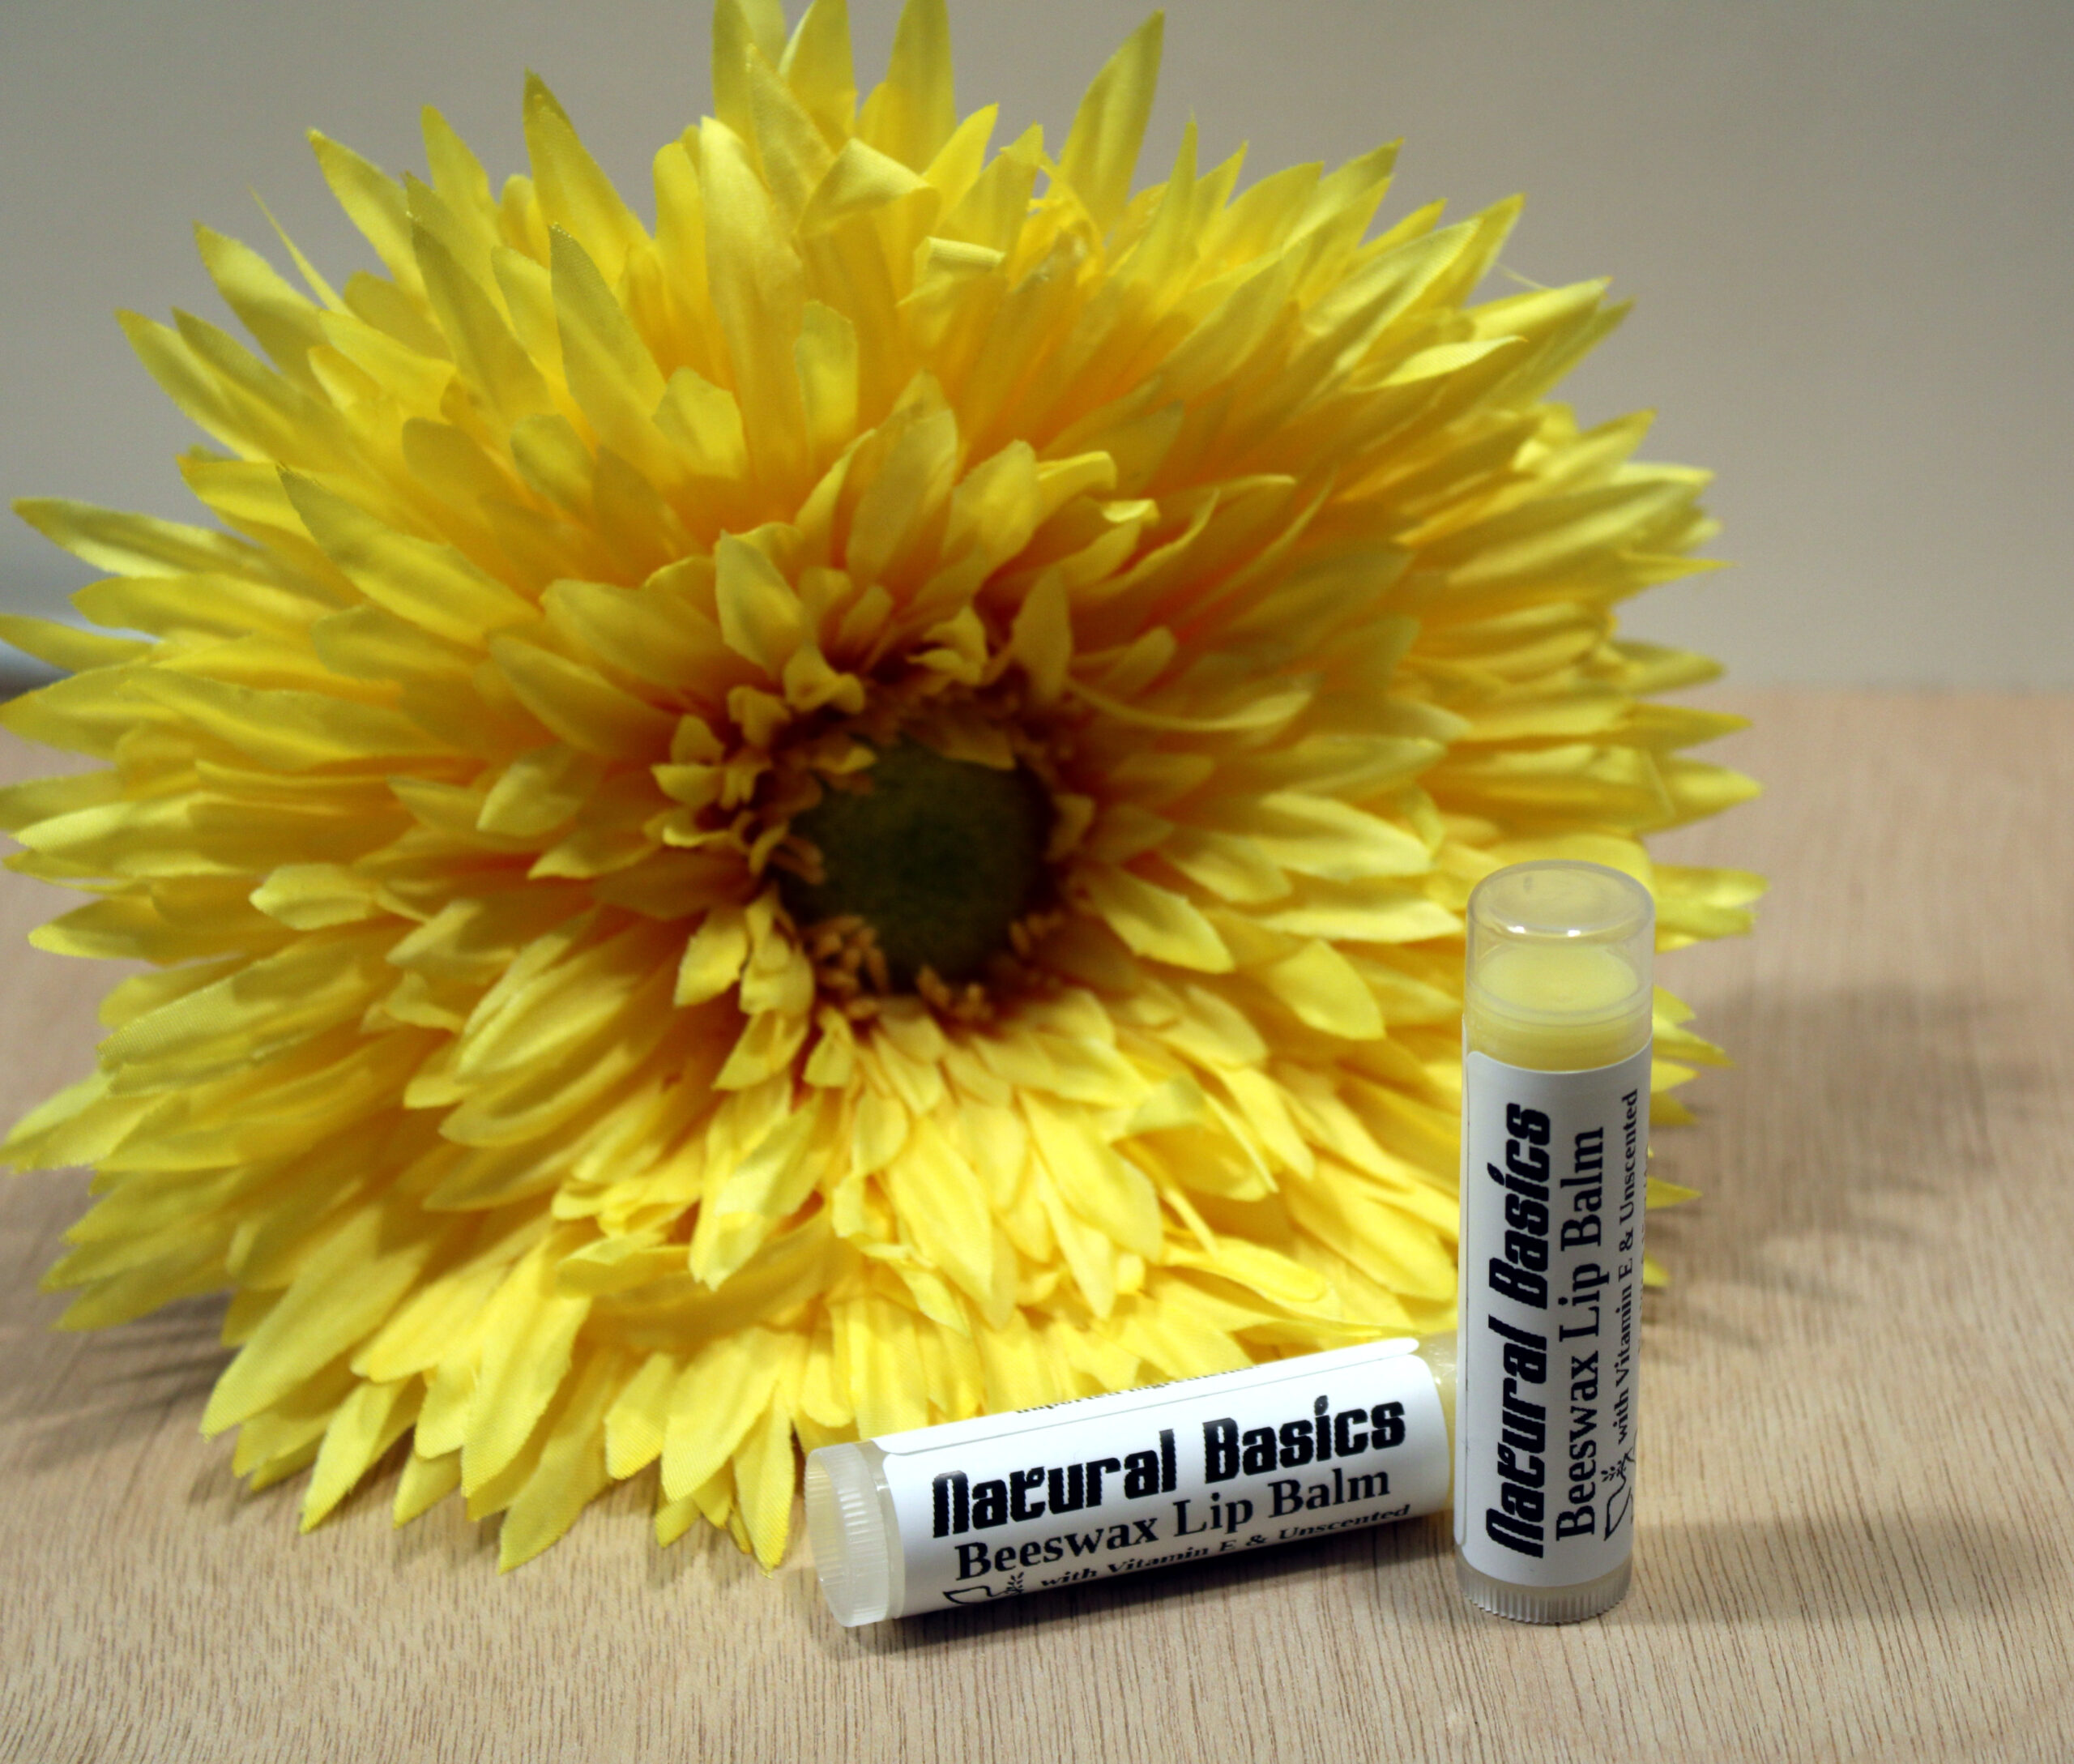 Preview: Beeswax Lip Balm with Vitamin E, Unscented (0.15oz)